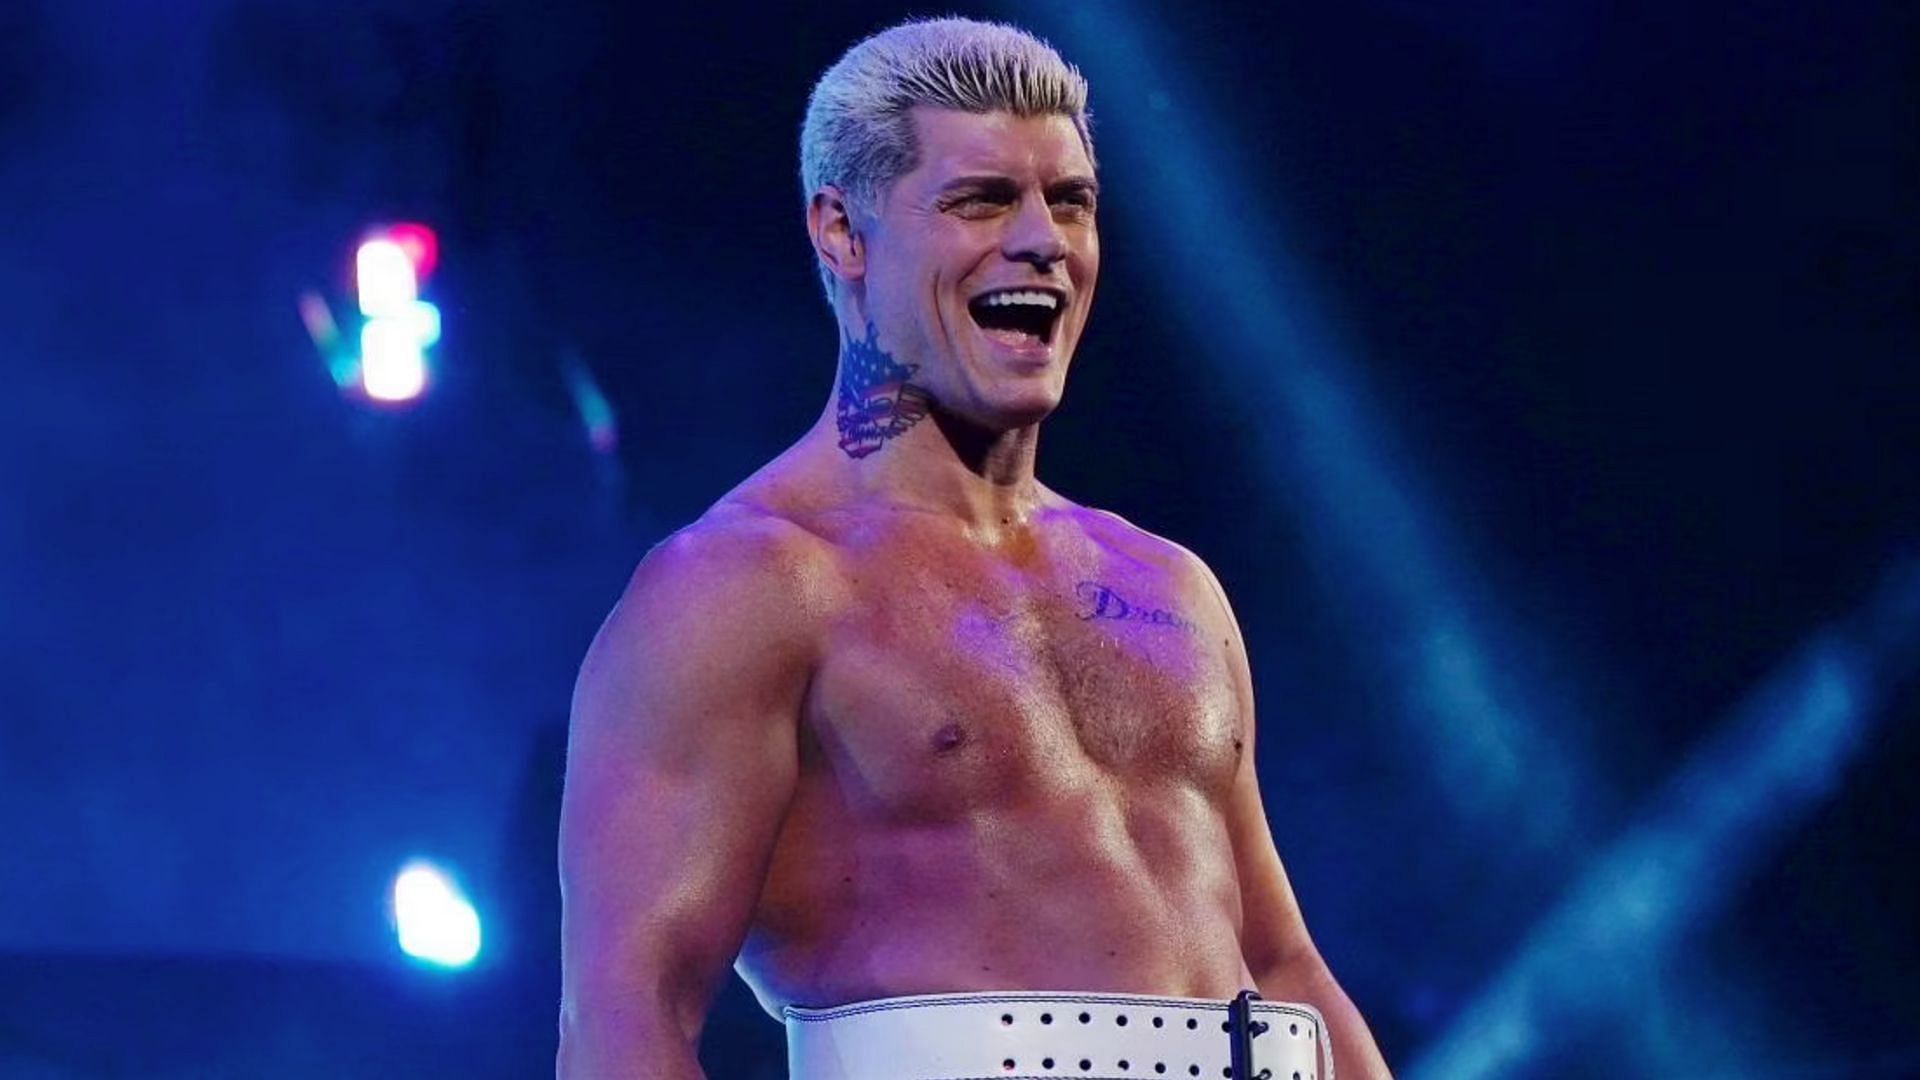 Cody Rhodes is currently off WWE TV with an injury